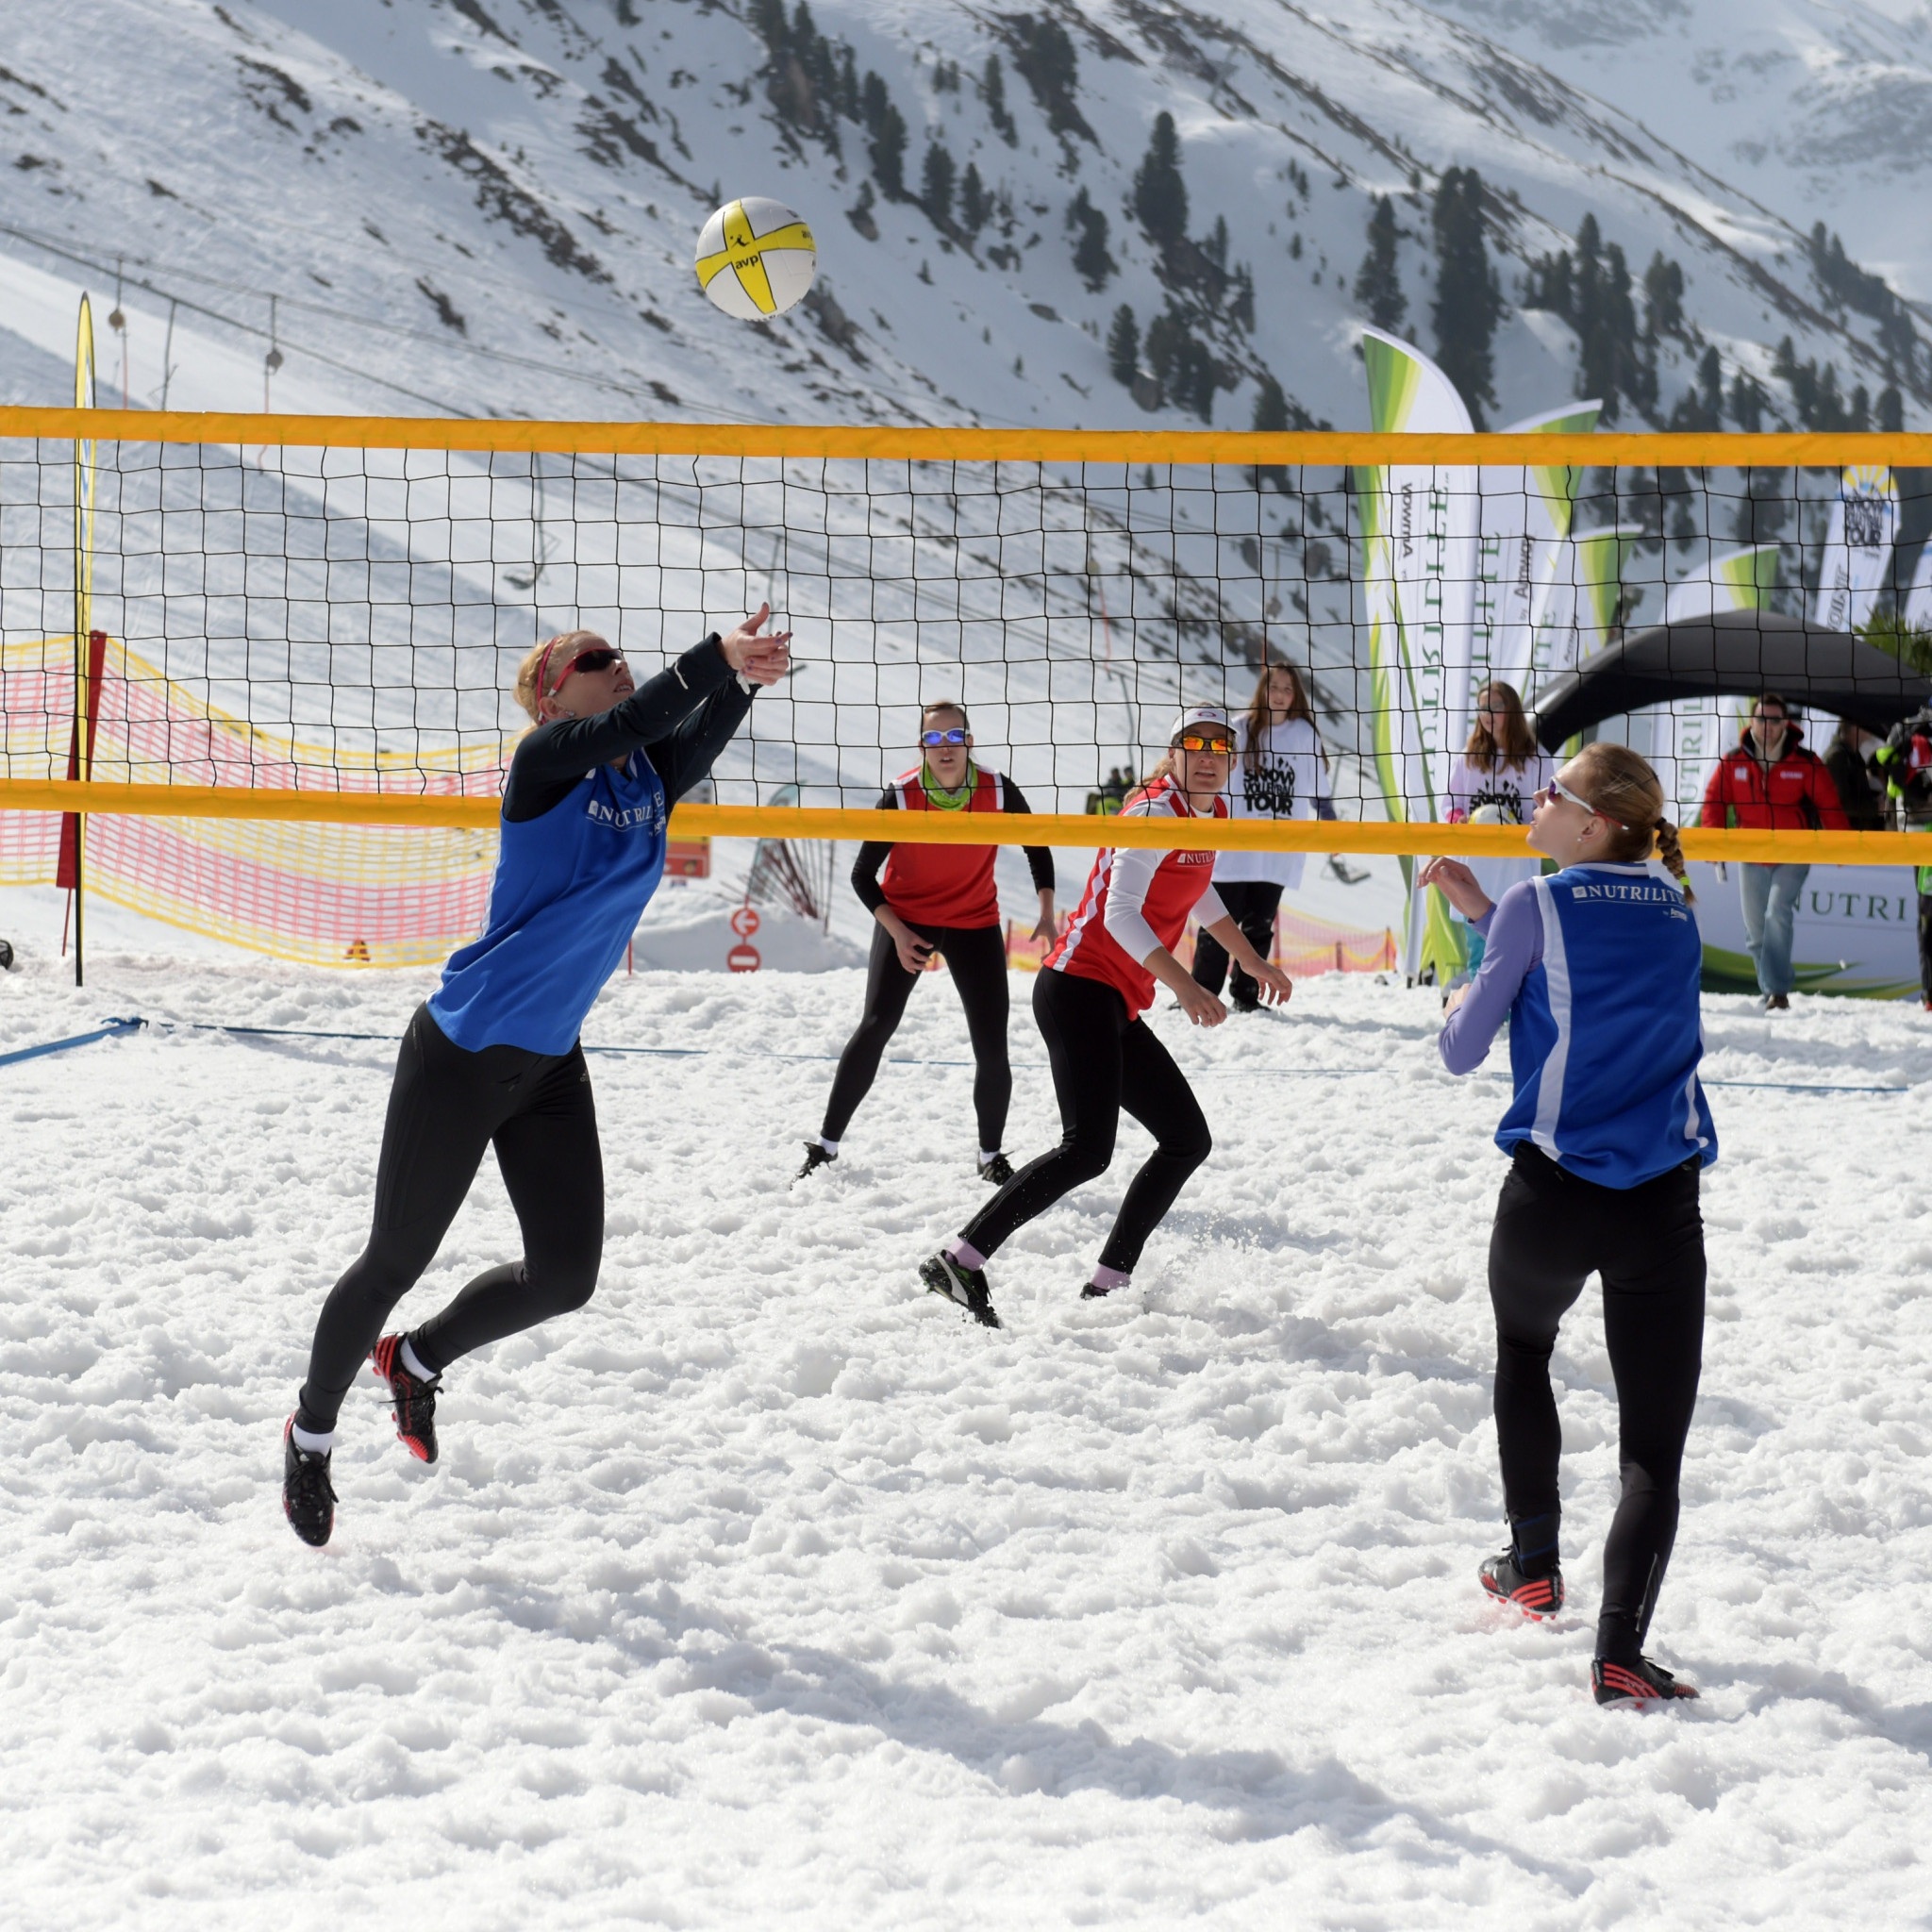 The European Volleyball Federation has approved a new 3x3 version of snow volleyball, in a bid to gain Winter Olympic inclusion ©Getty Images